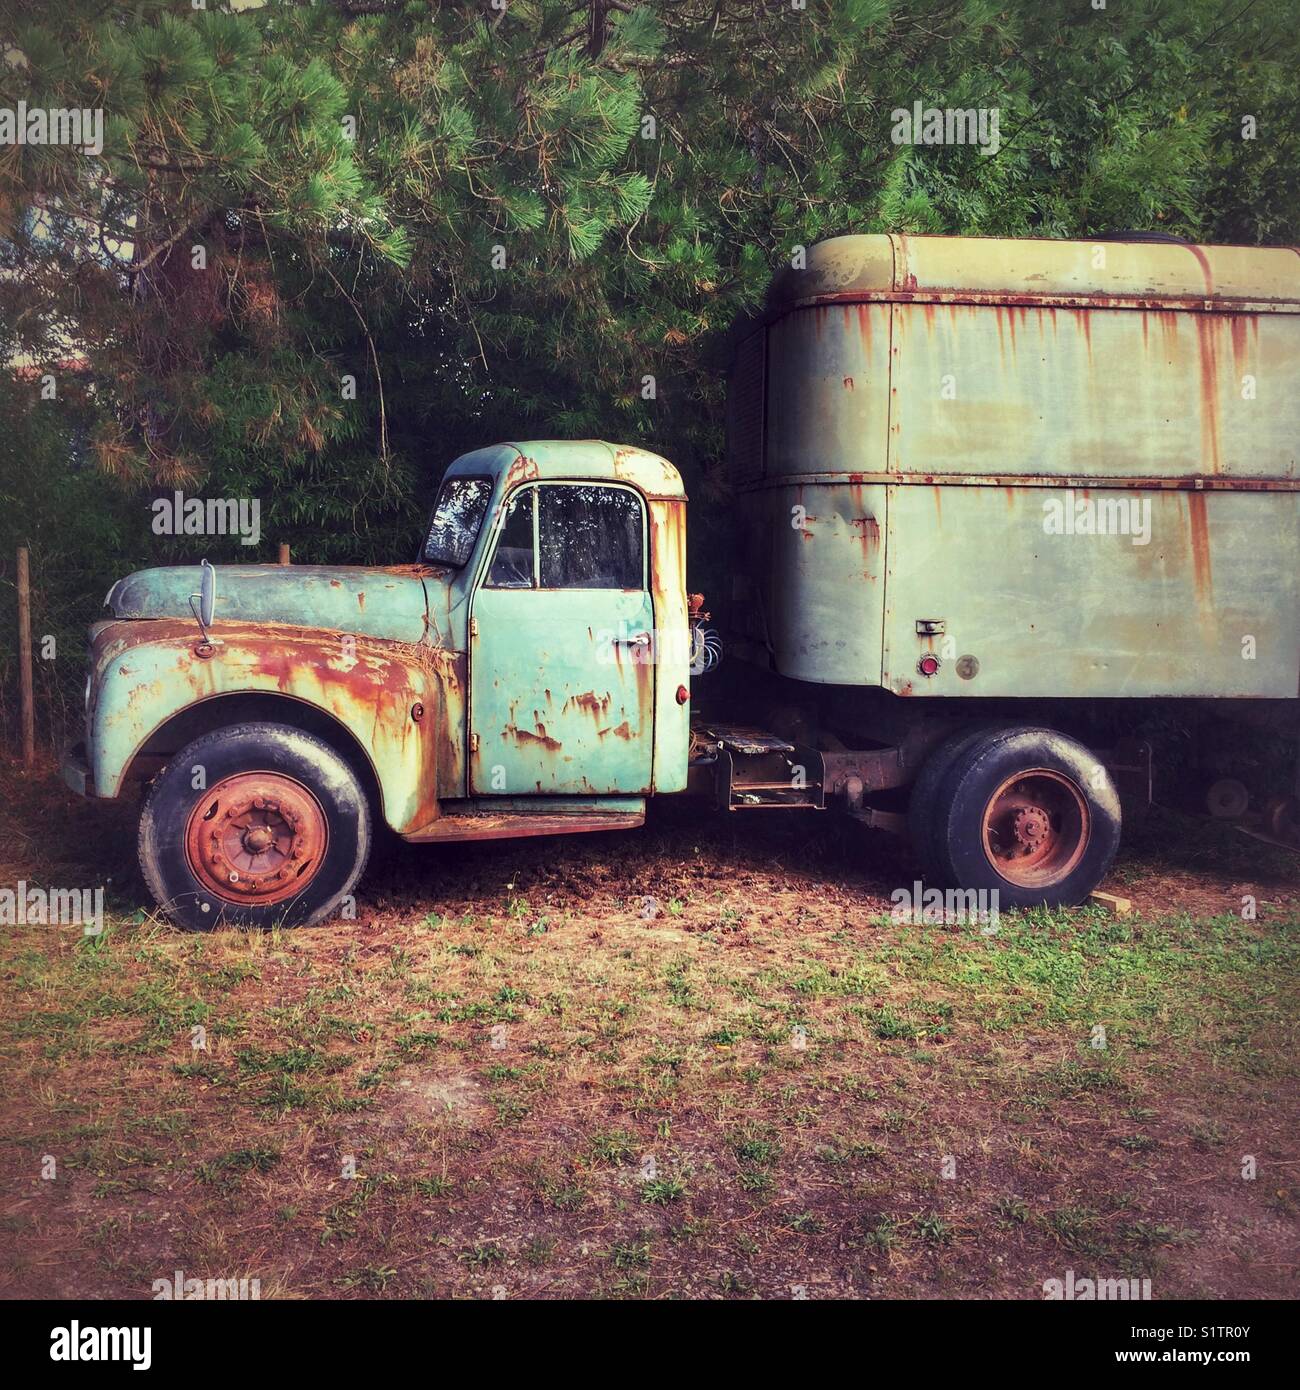 An old vintage truck Stock Photo